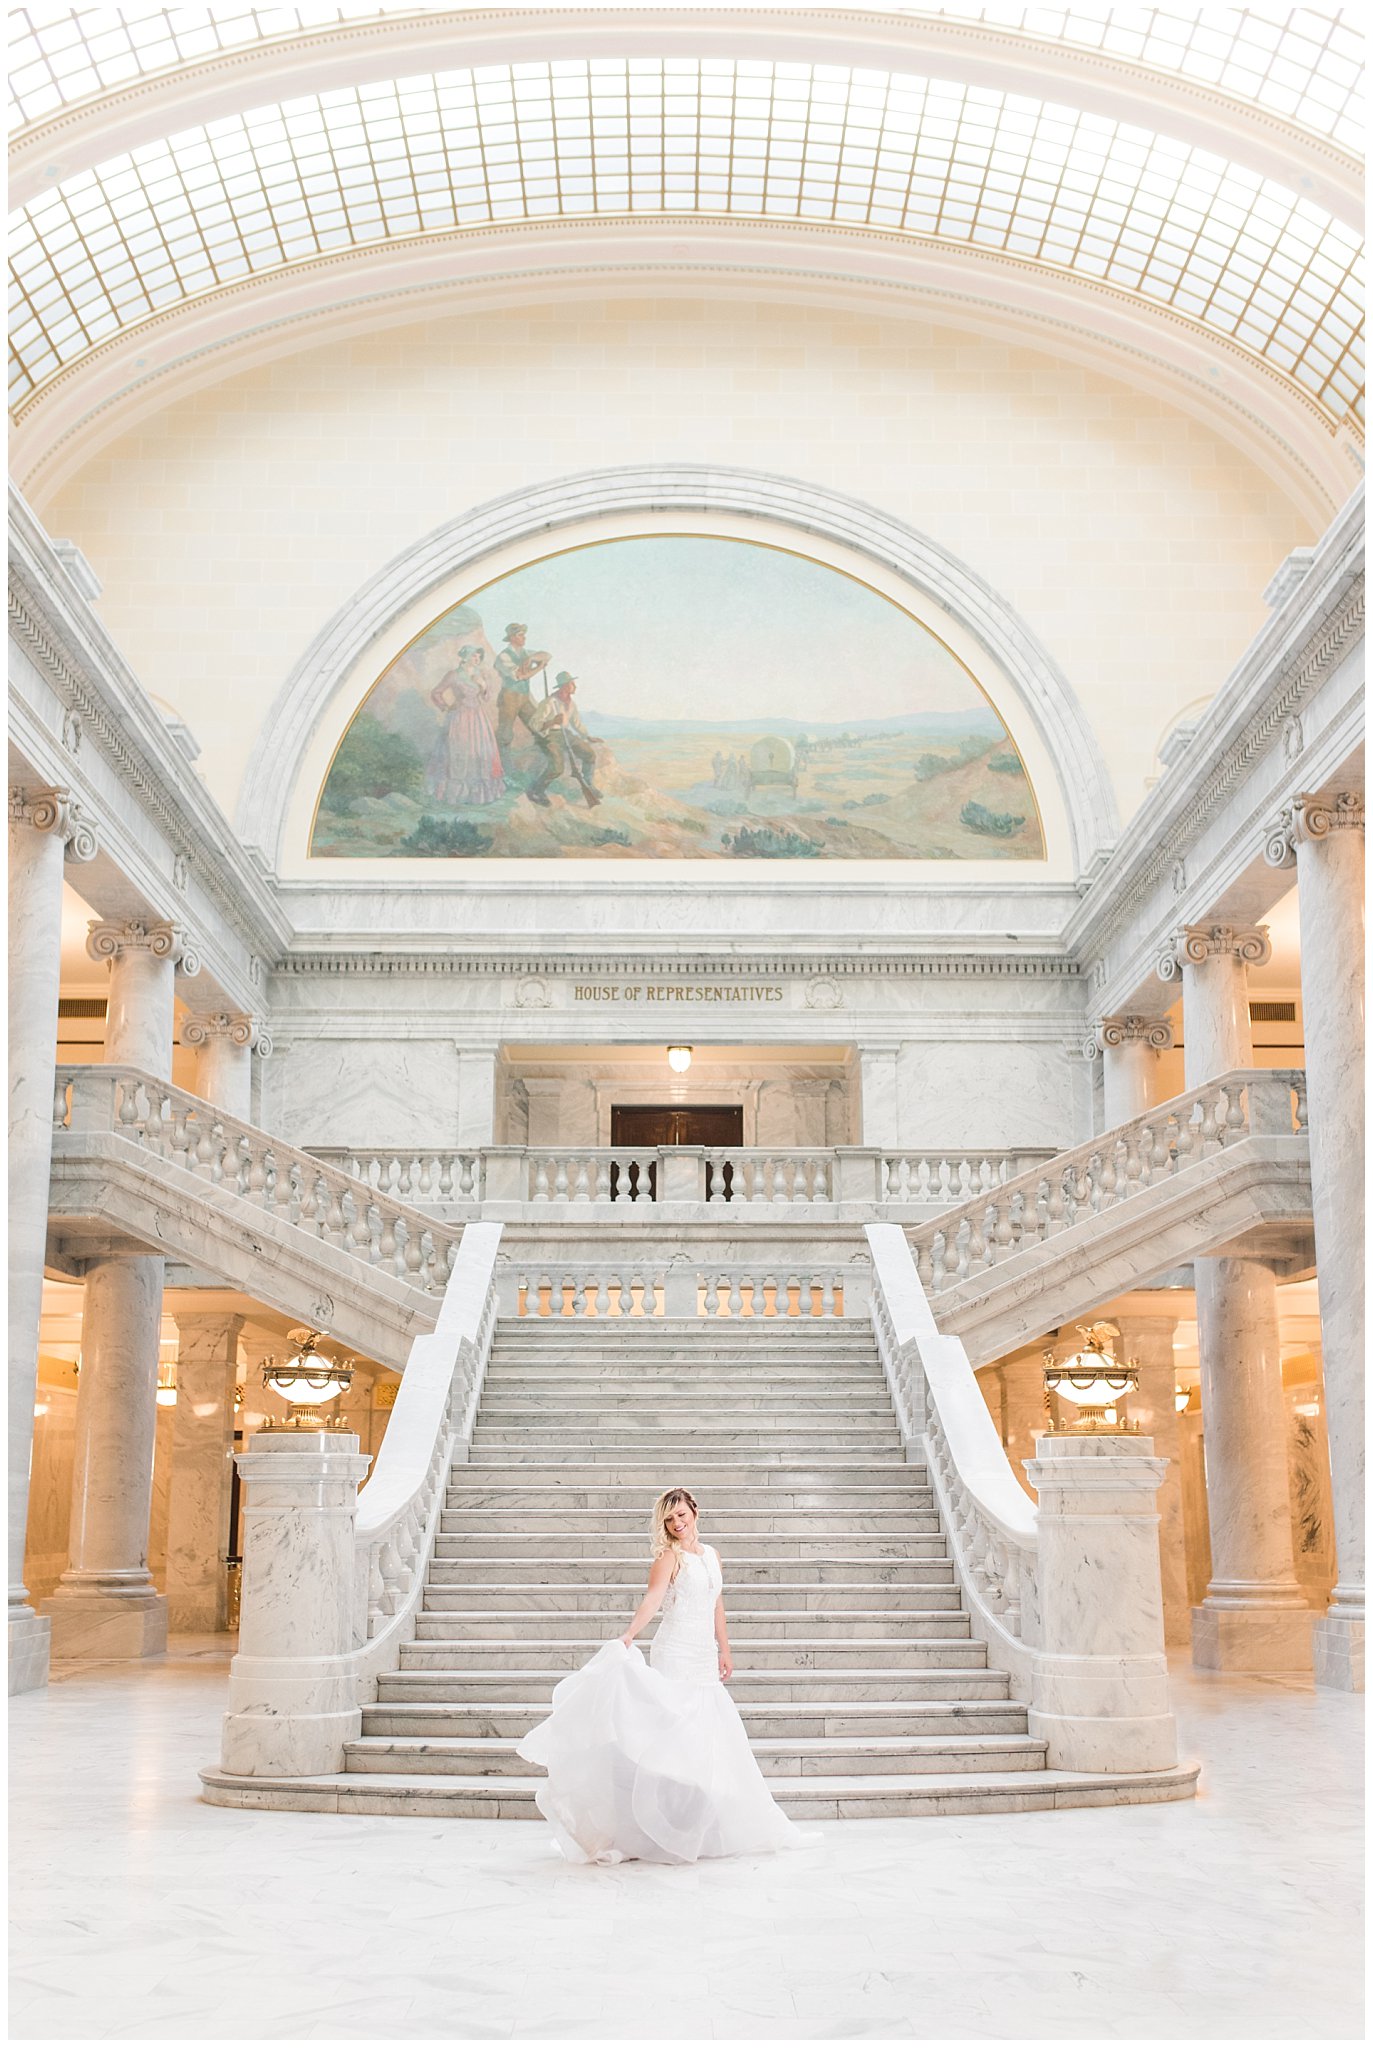 Bride twirls dress inside the Utah State Capitol building | Top Utah Wedding and Couples Photos 2019 | Jessie and Dallin Photography